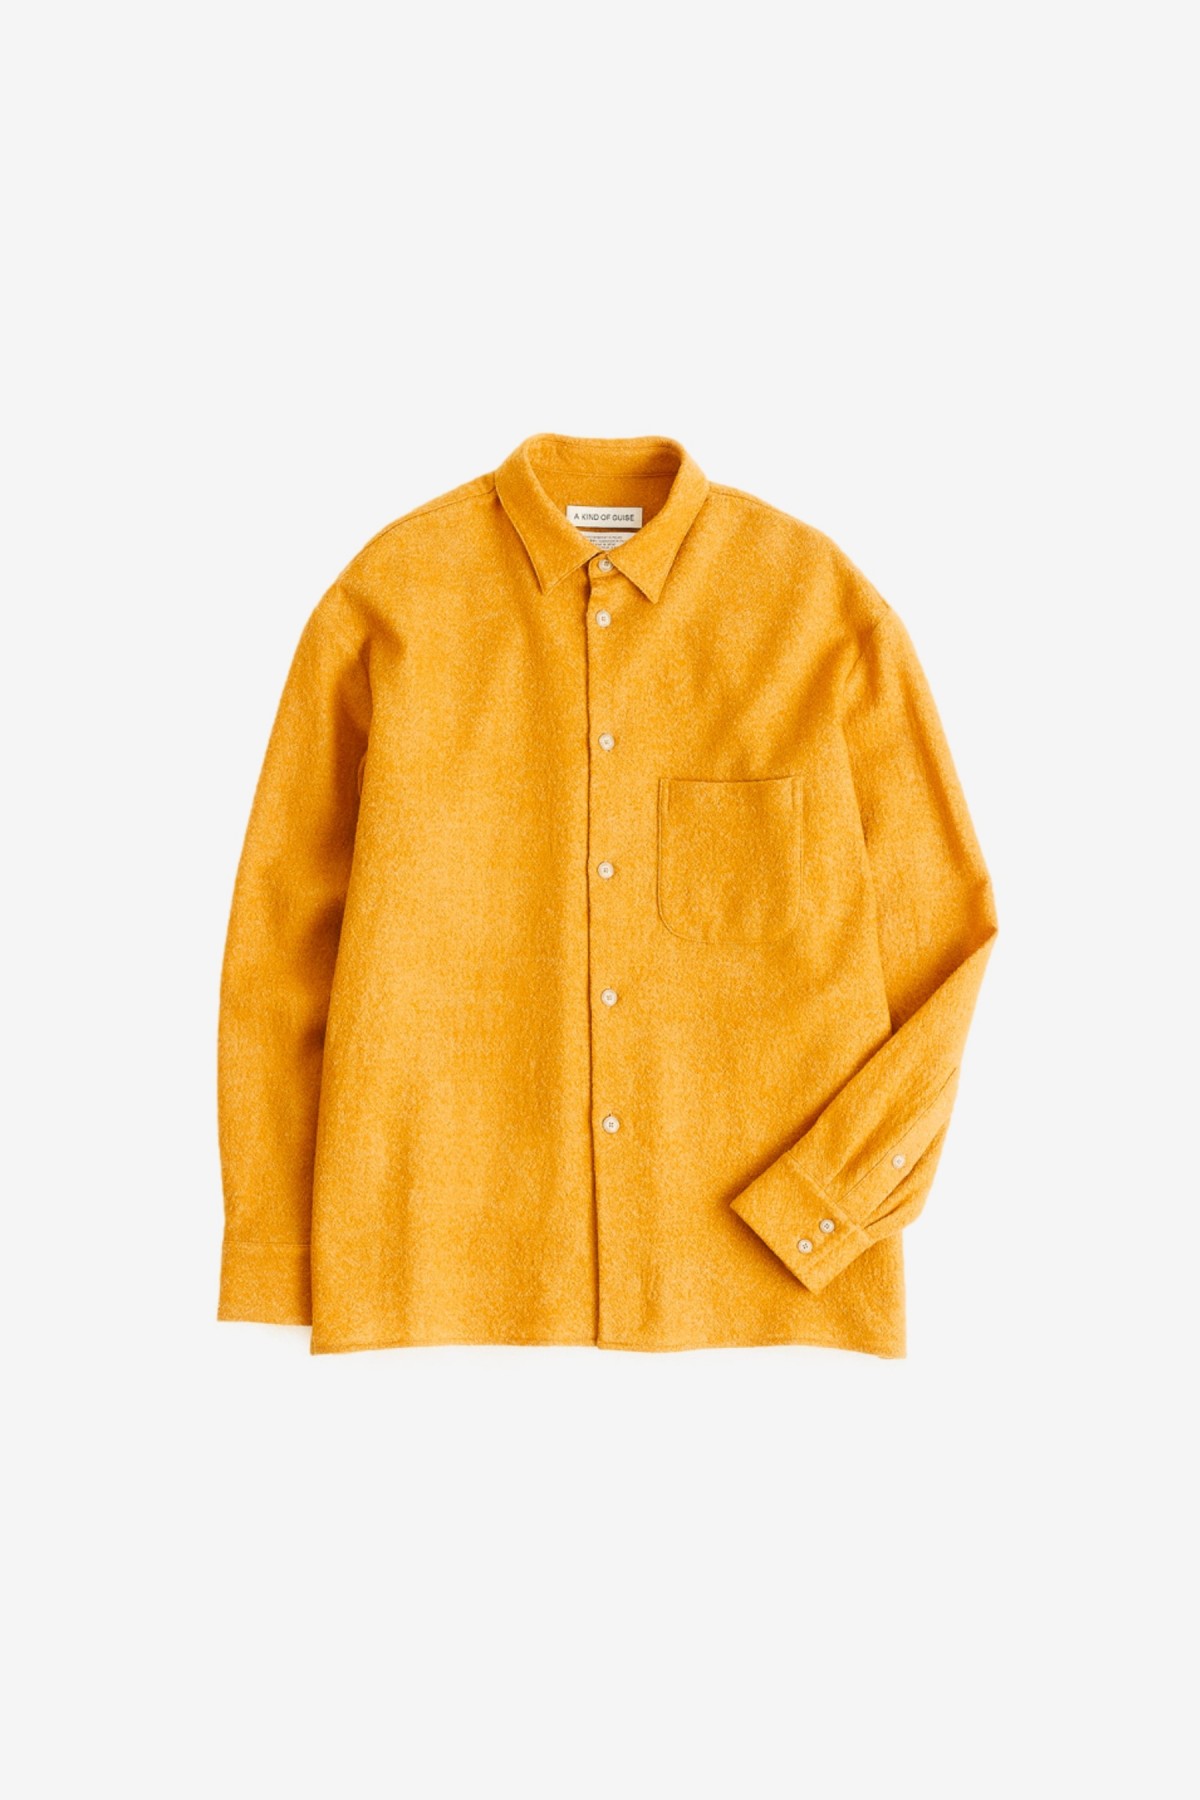 A Kind of Guise Gusto Shirt in Butterscotch